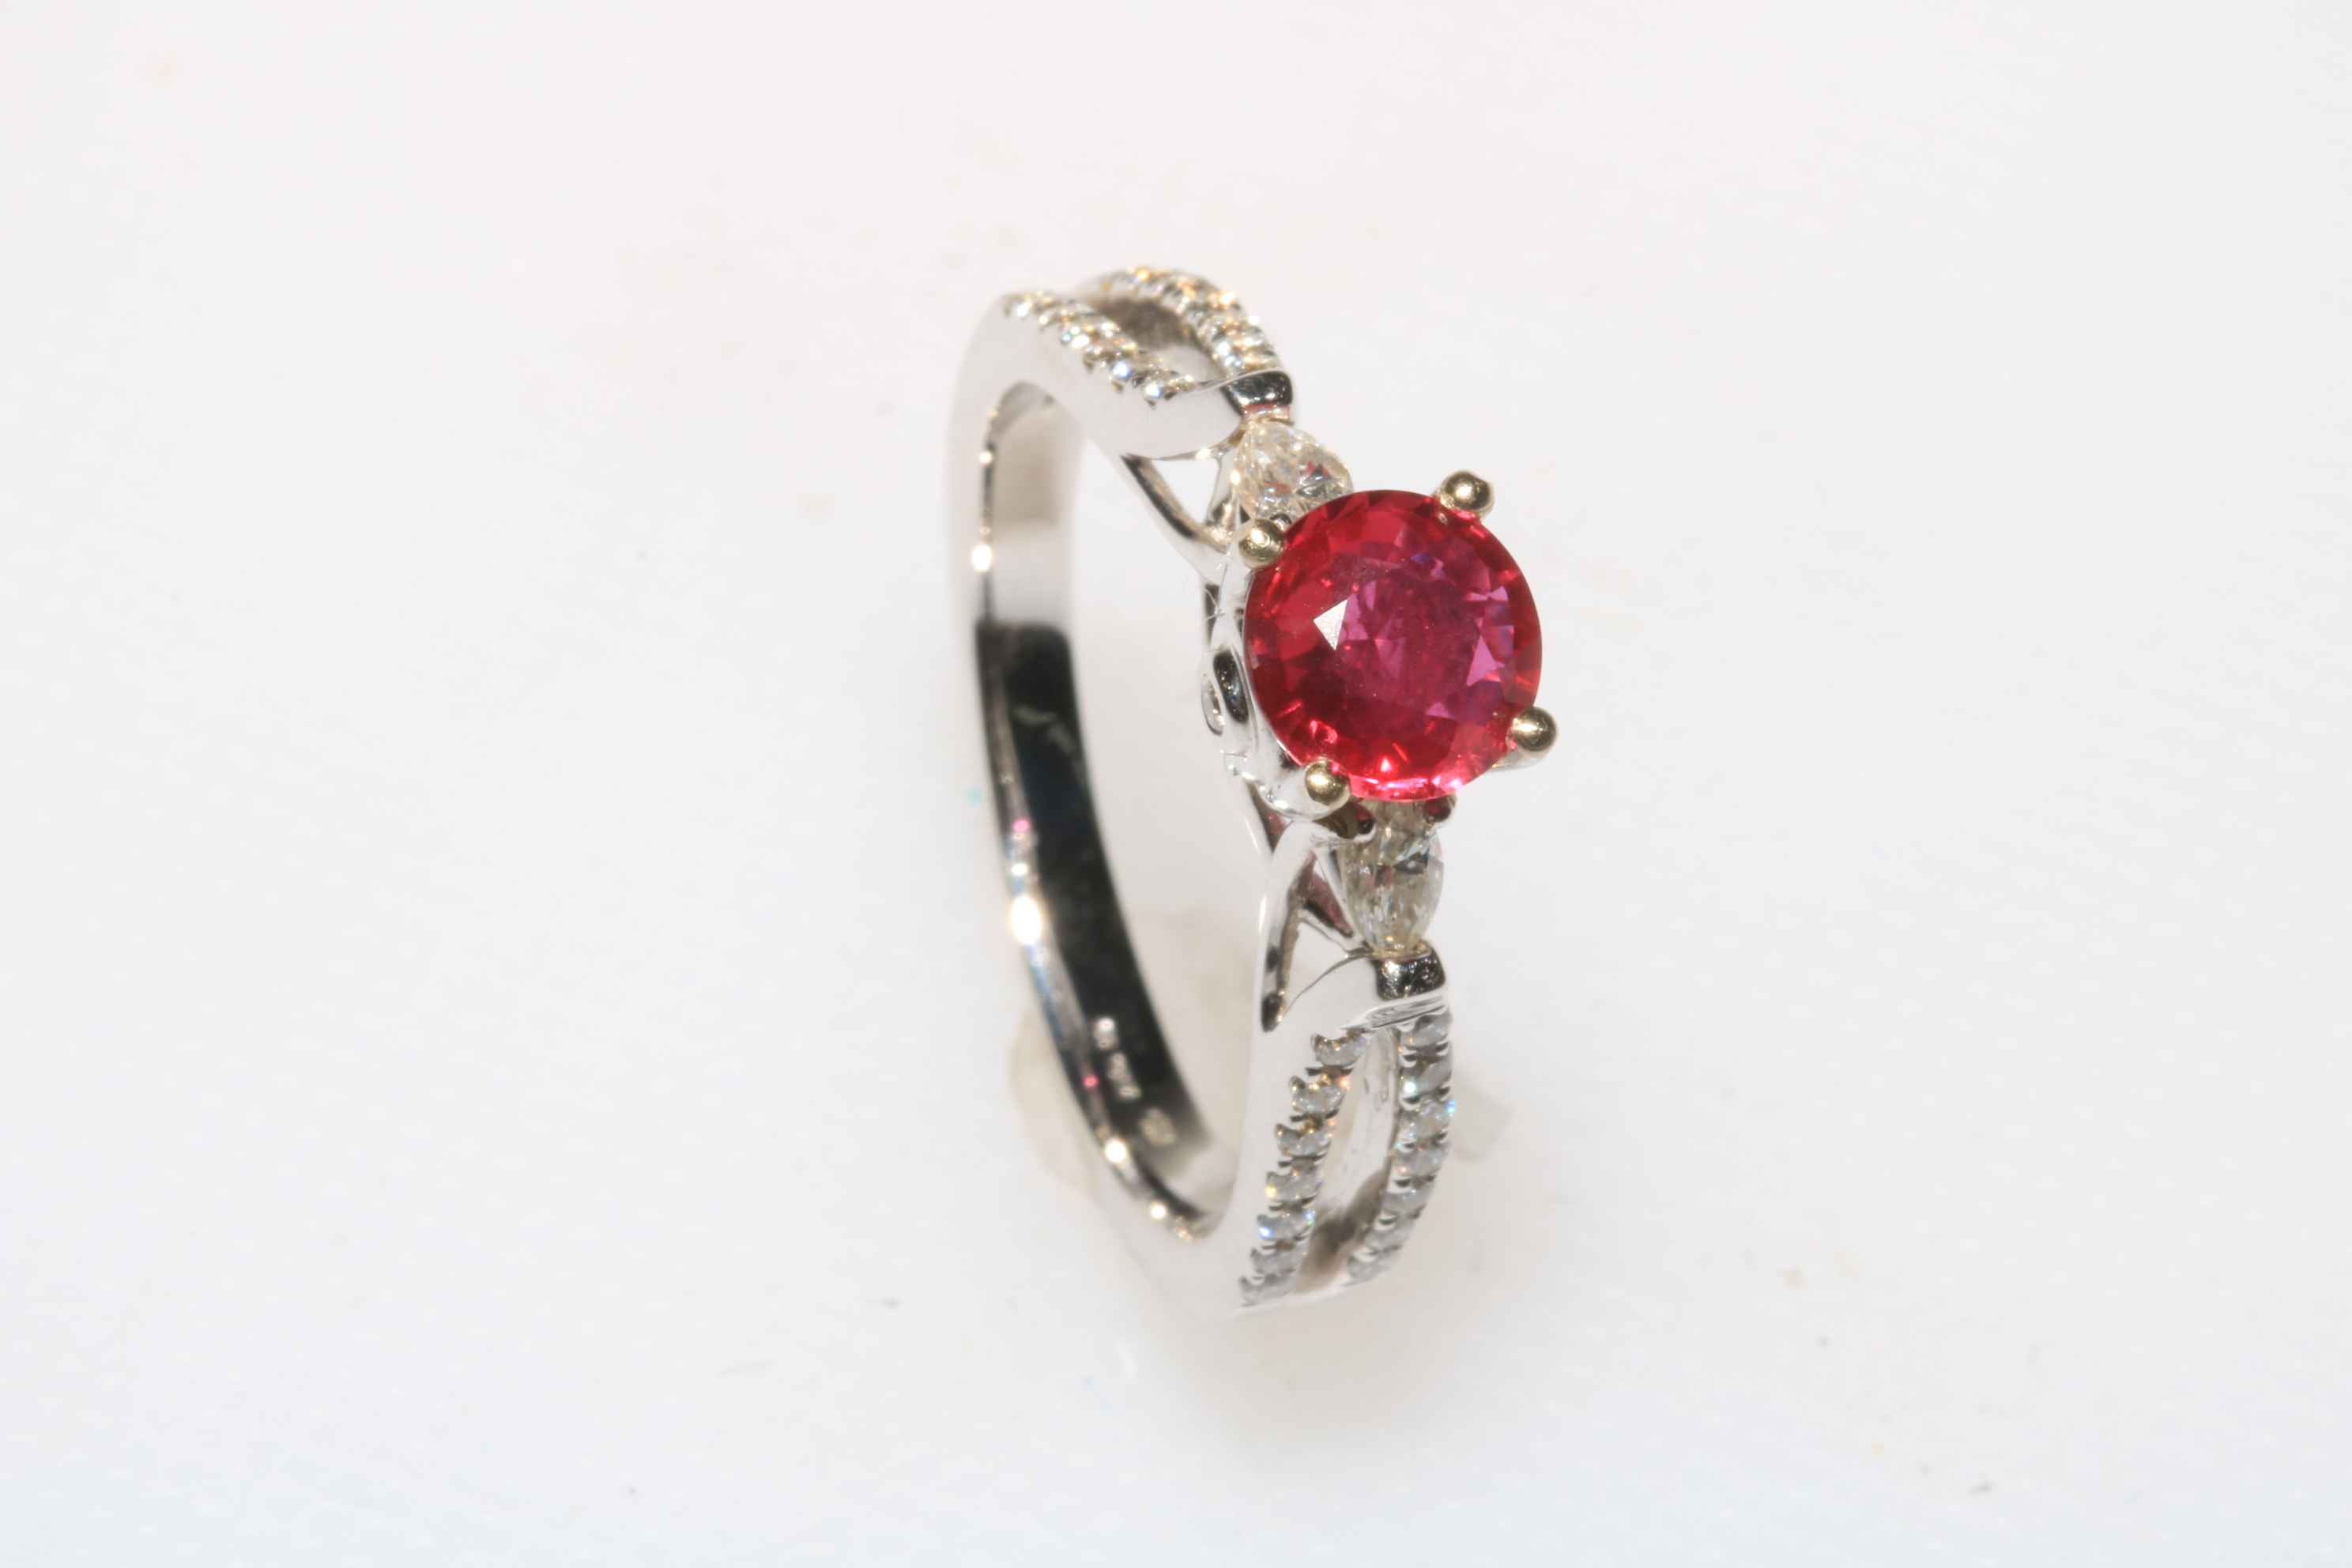 18 carat white gold, oval ruby and diamond ring, ruby 0.86 carat, total diamond weight 0.